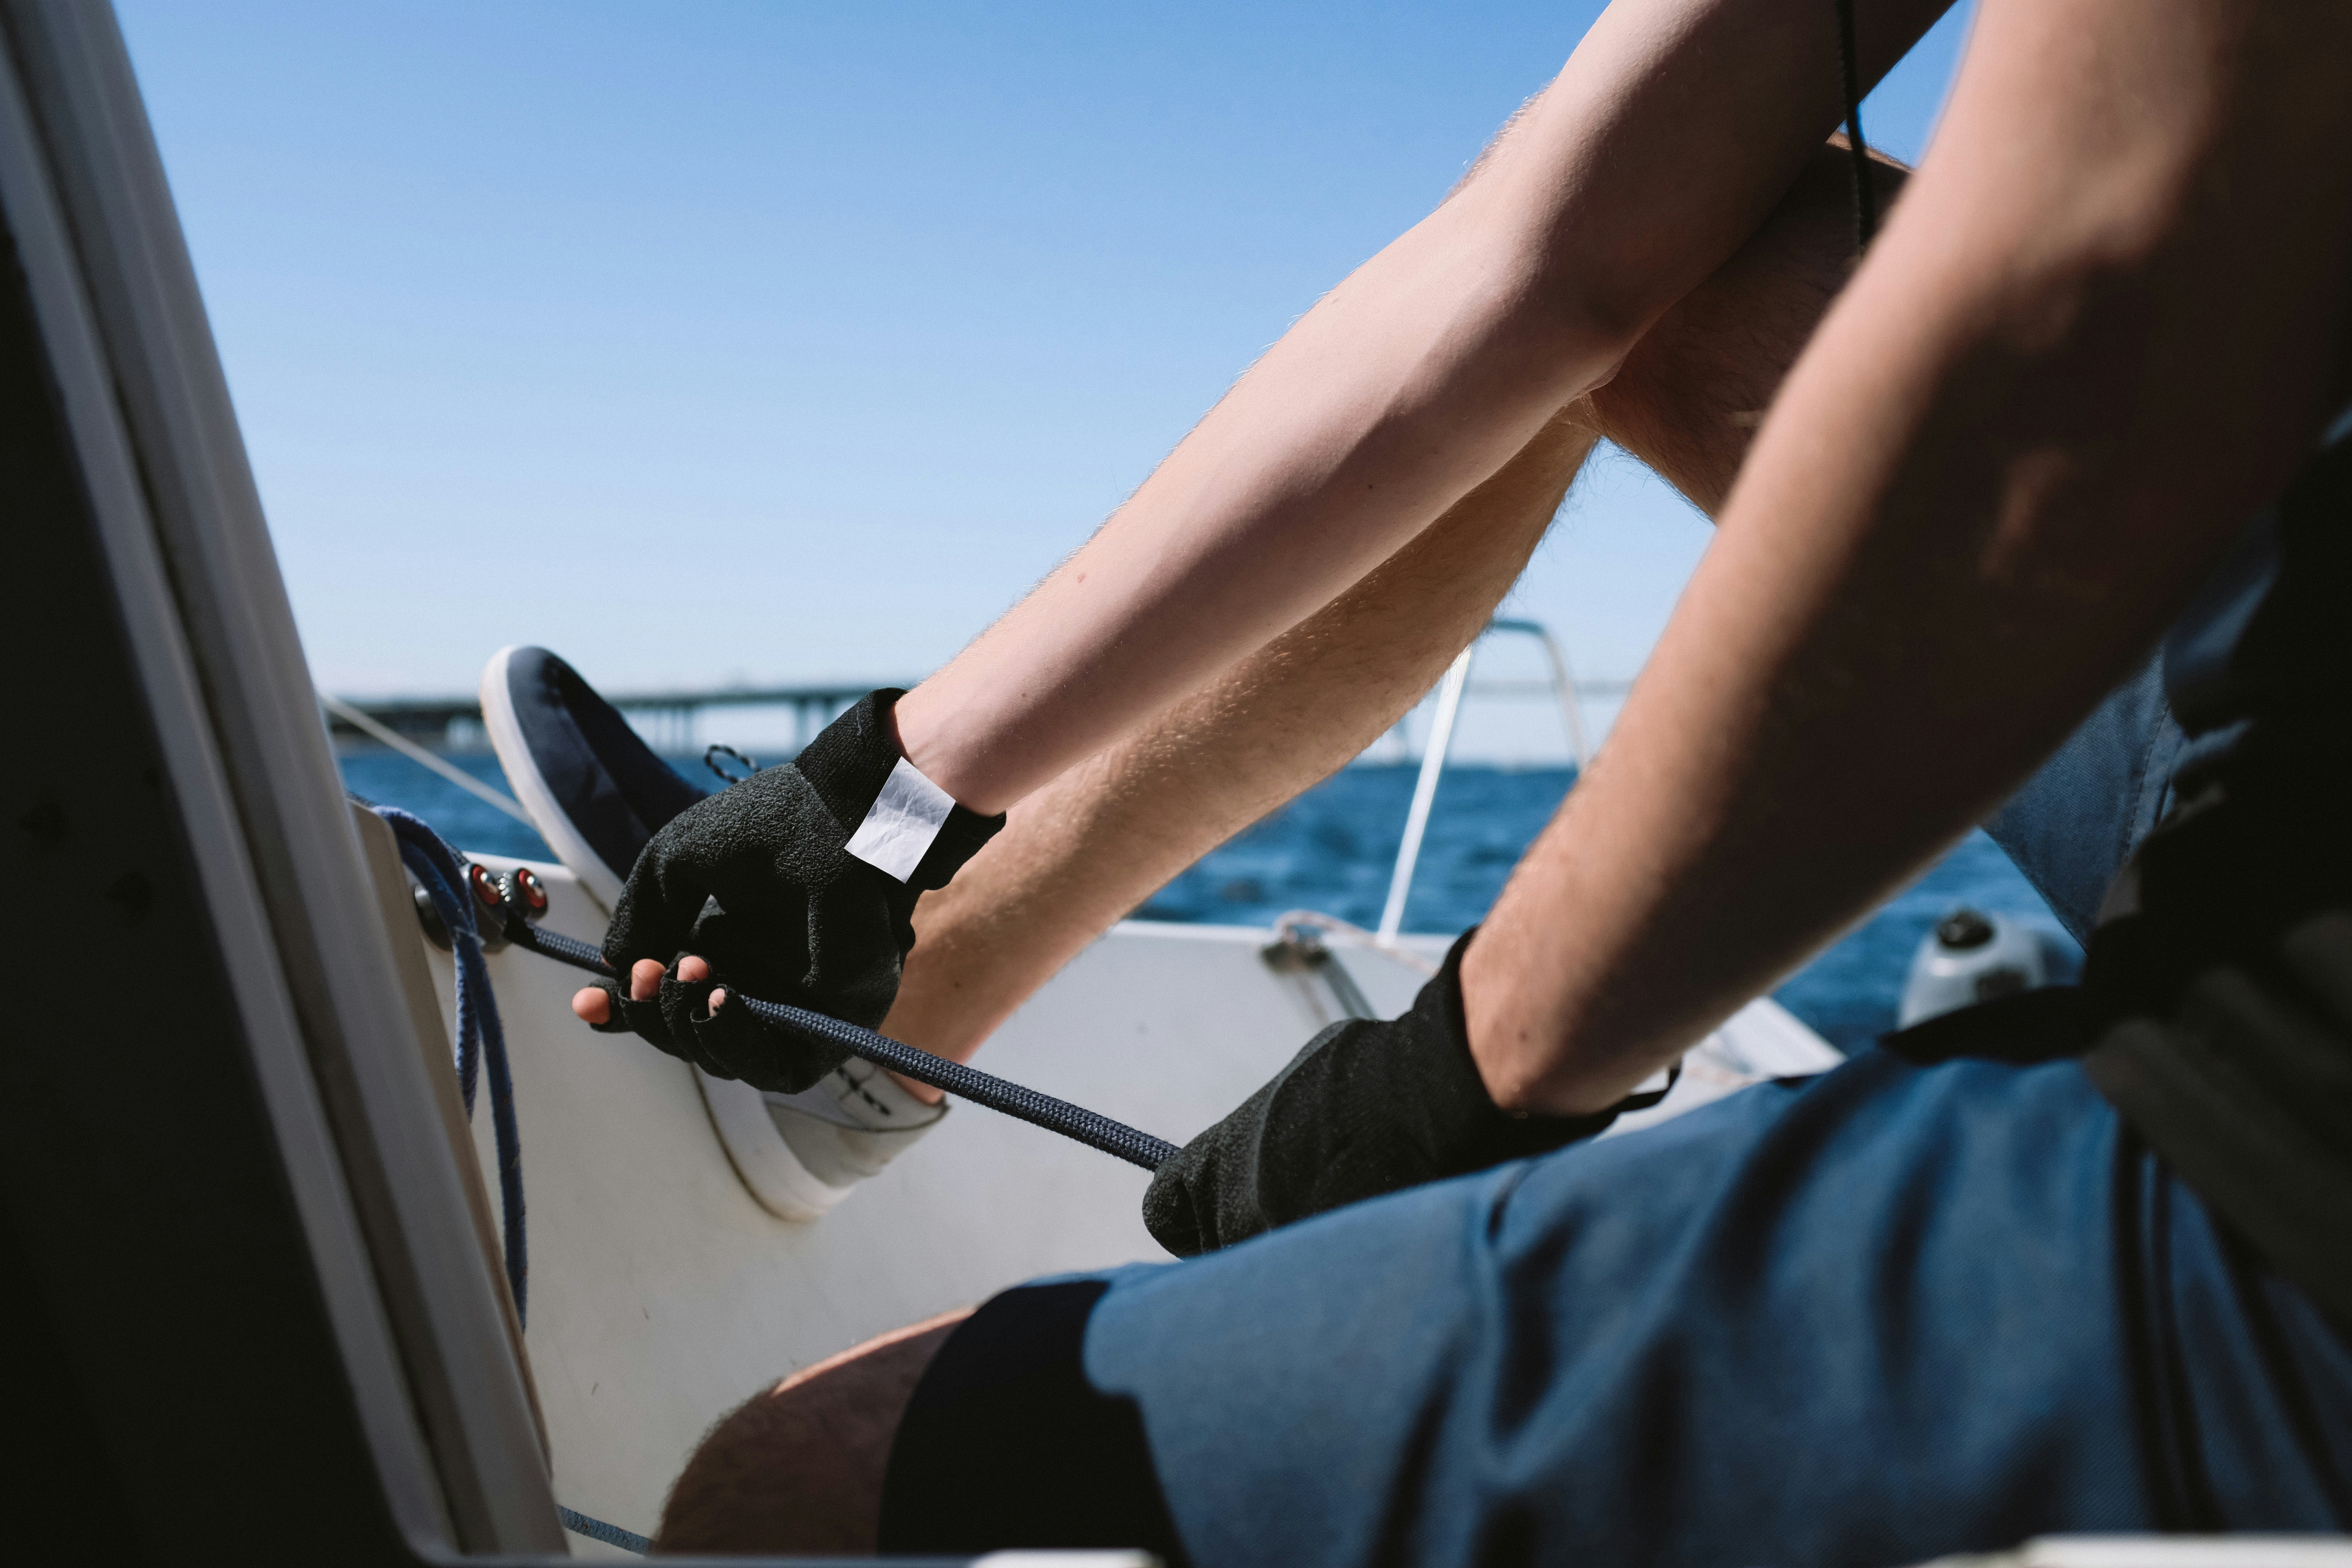 Sailing gloves protect hands against discomfort